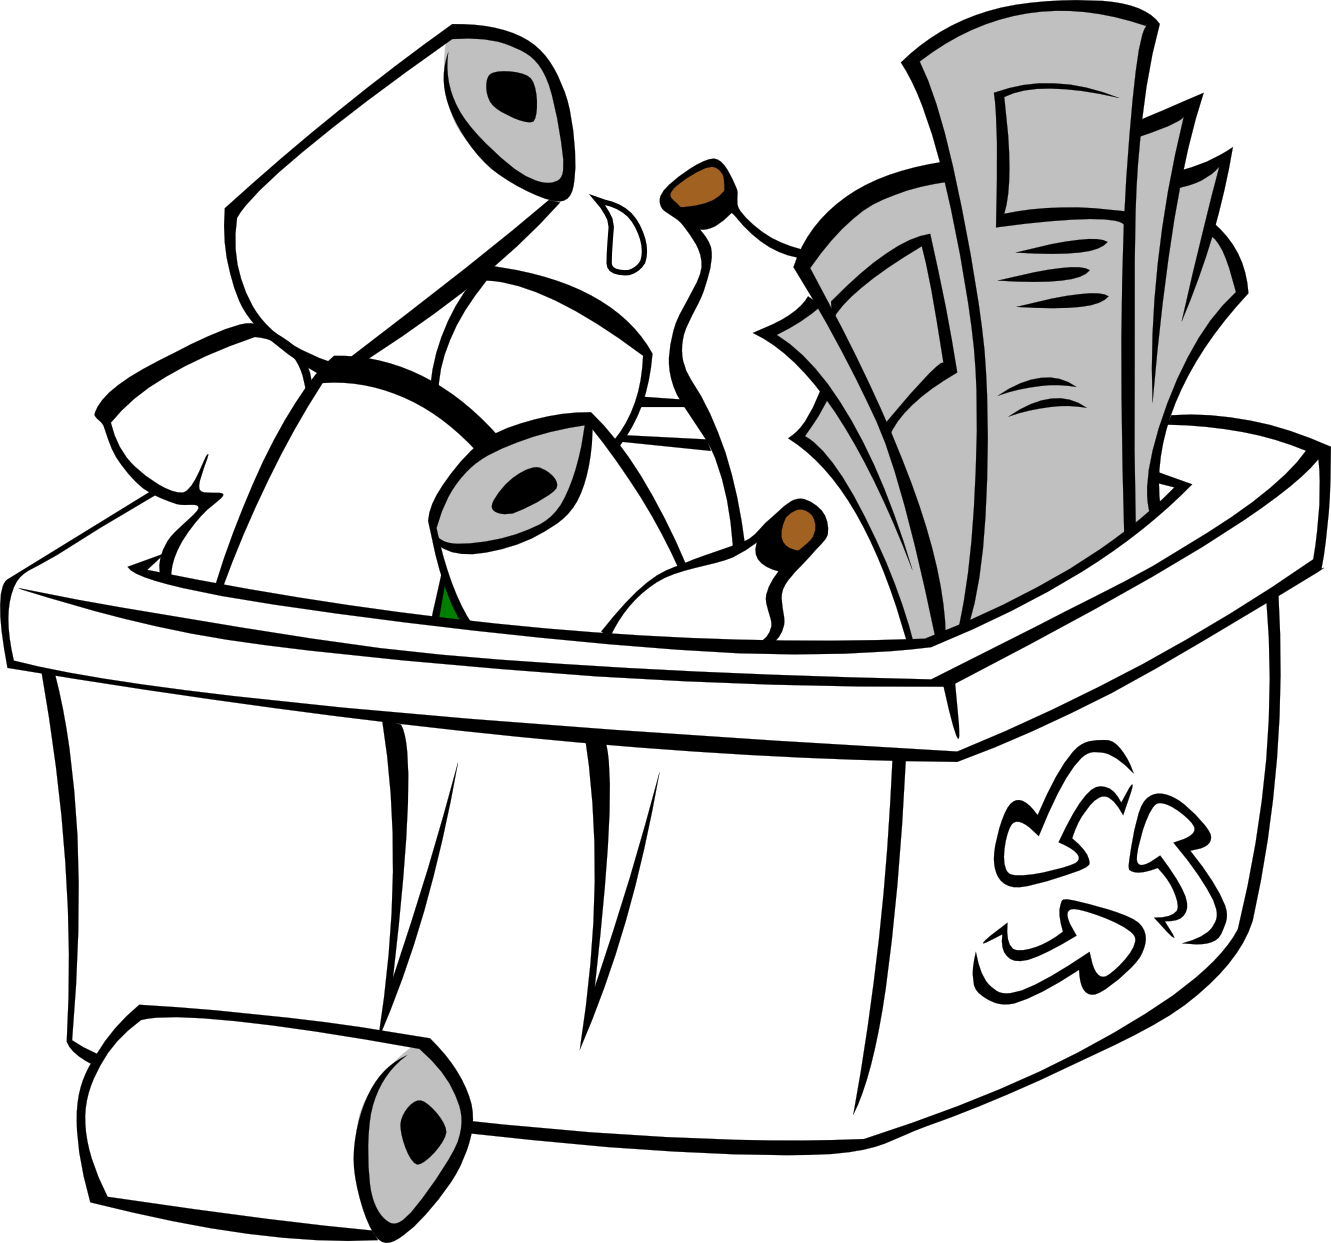 Paper clipart recycle bin. Recycling free download best